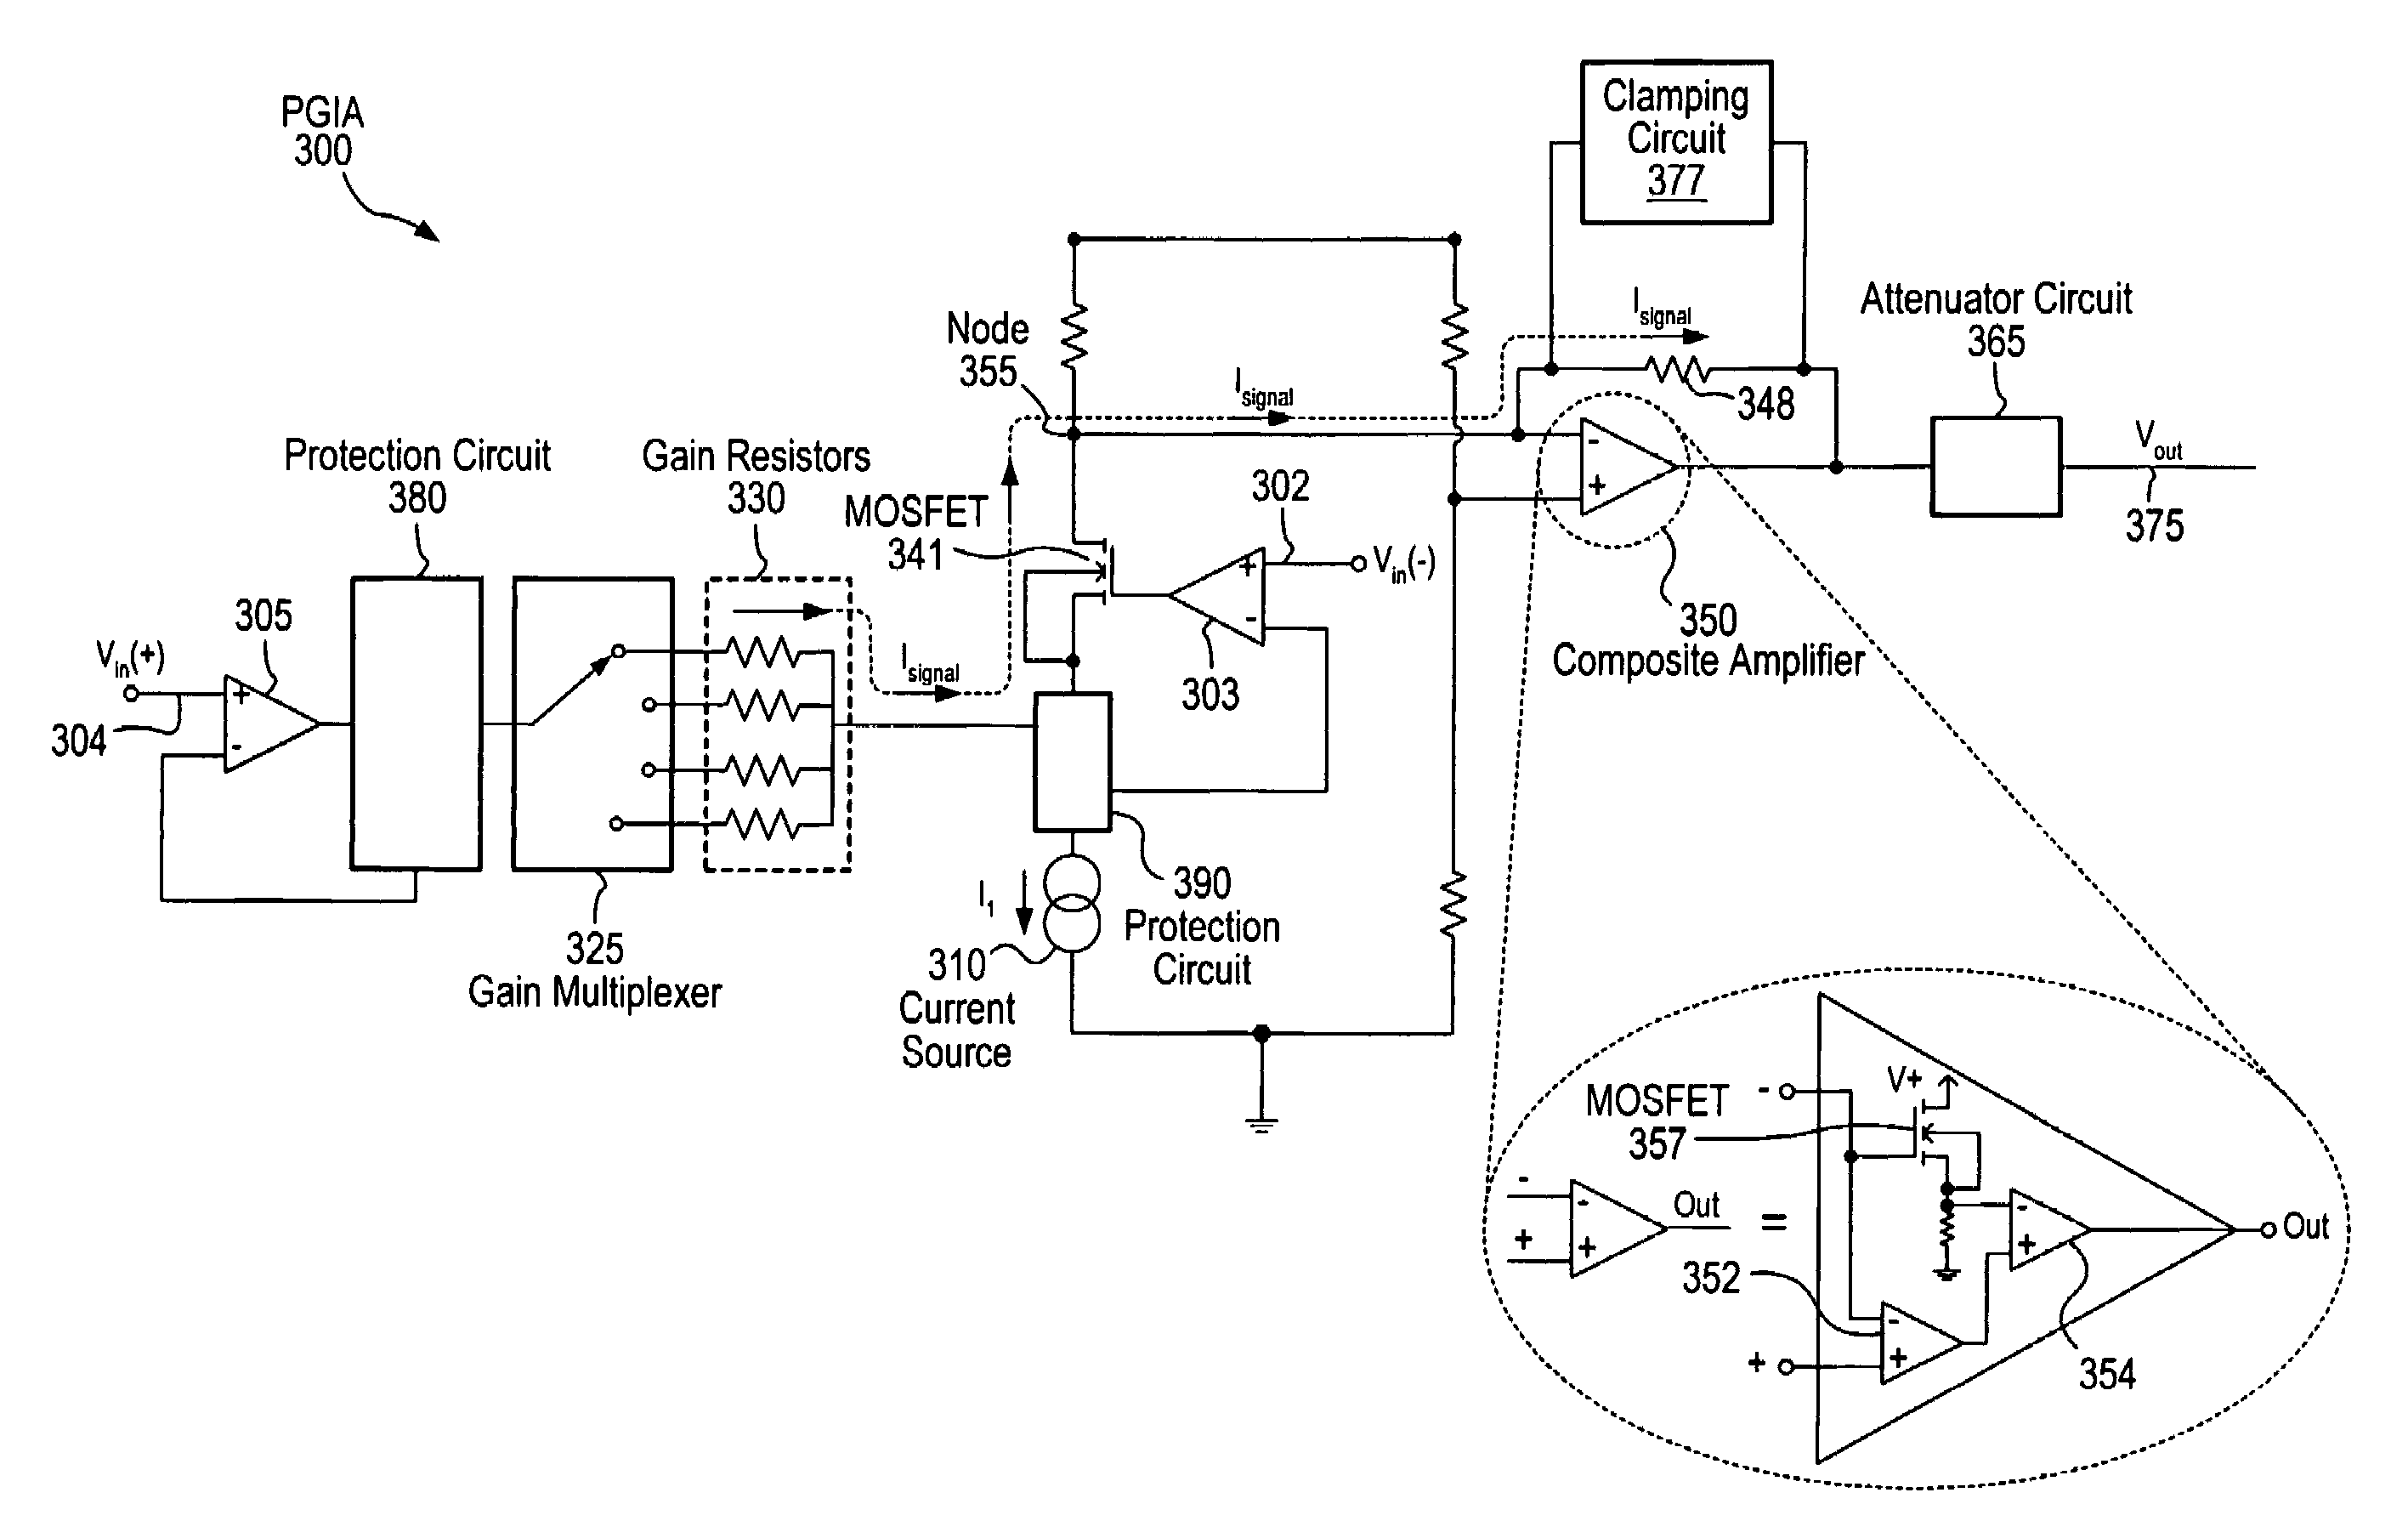 Programmable gain instrumentation amplifier including a composite amplifier for level shifting and improved signal-to-noise ratio